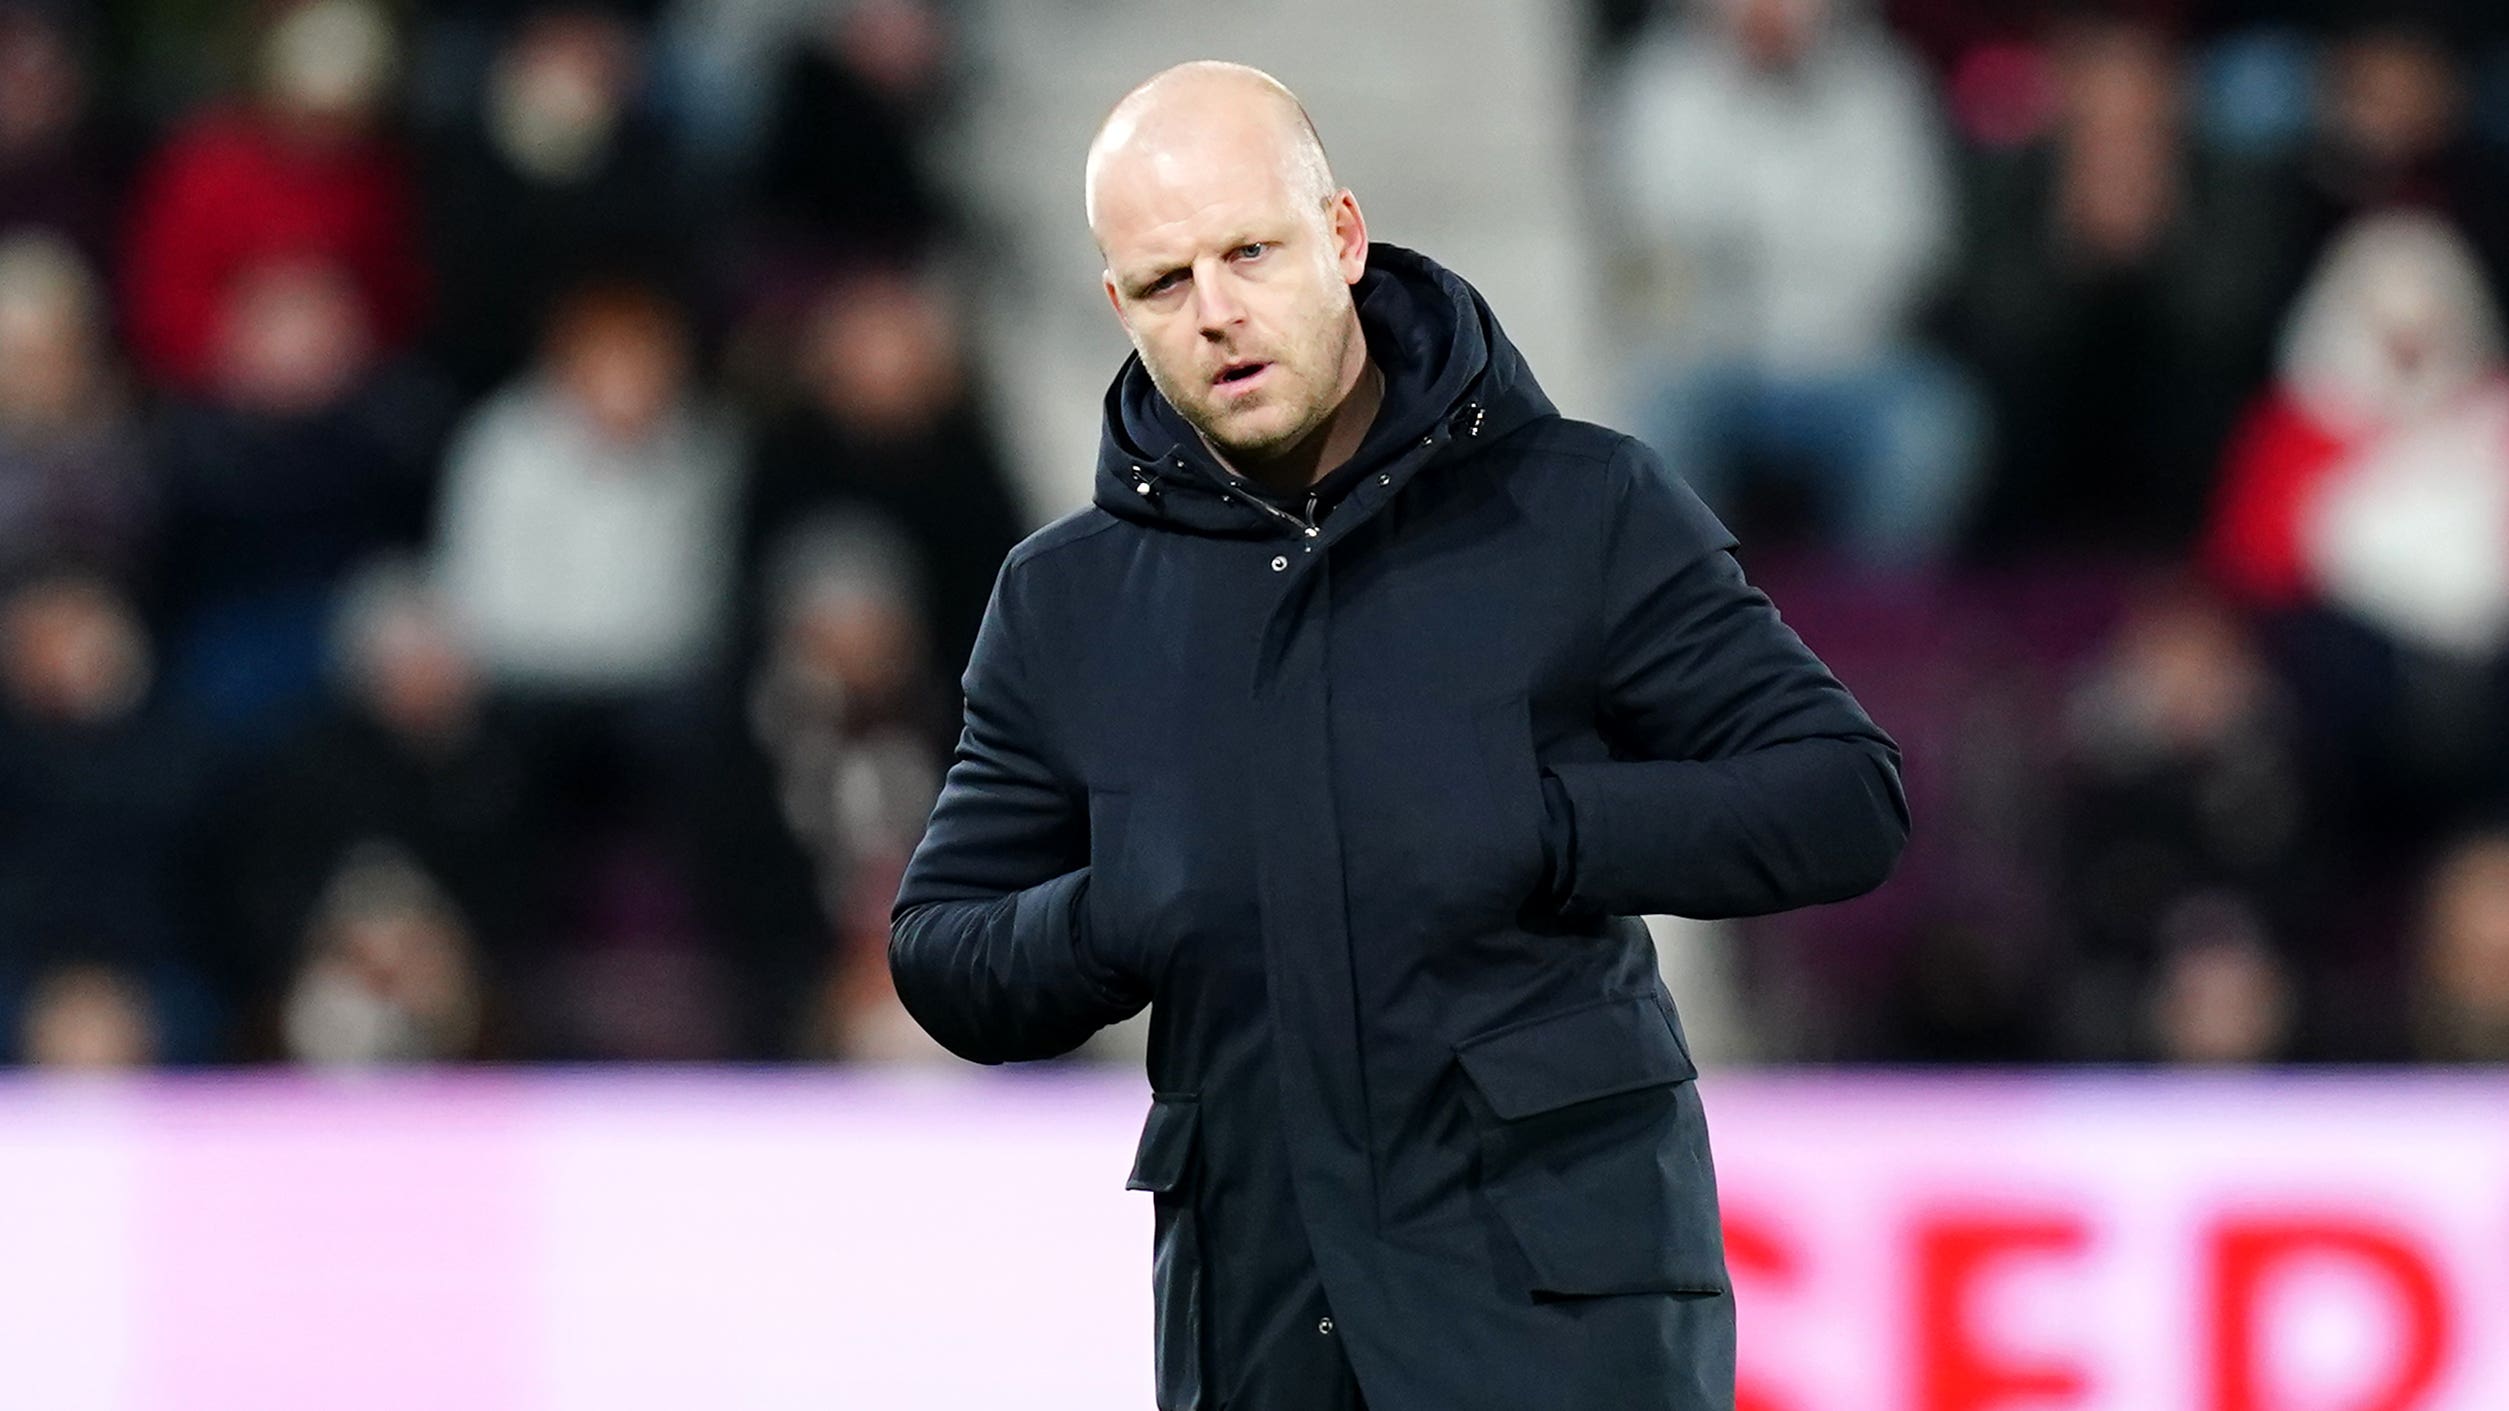 Steven Naismith hails battling Hearts after win on ‘rubbish’ Livingston pitch